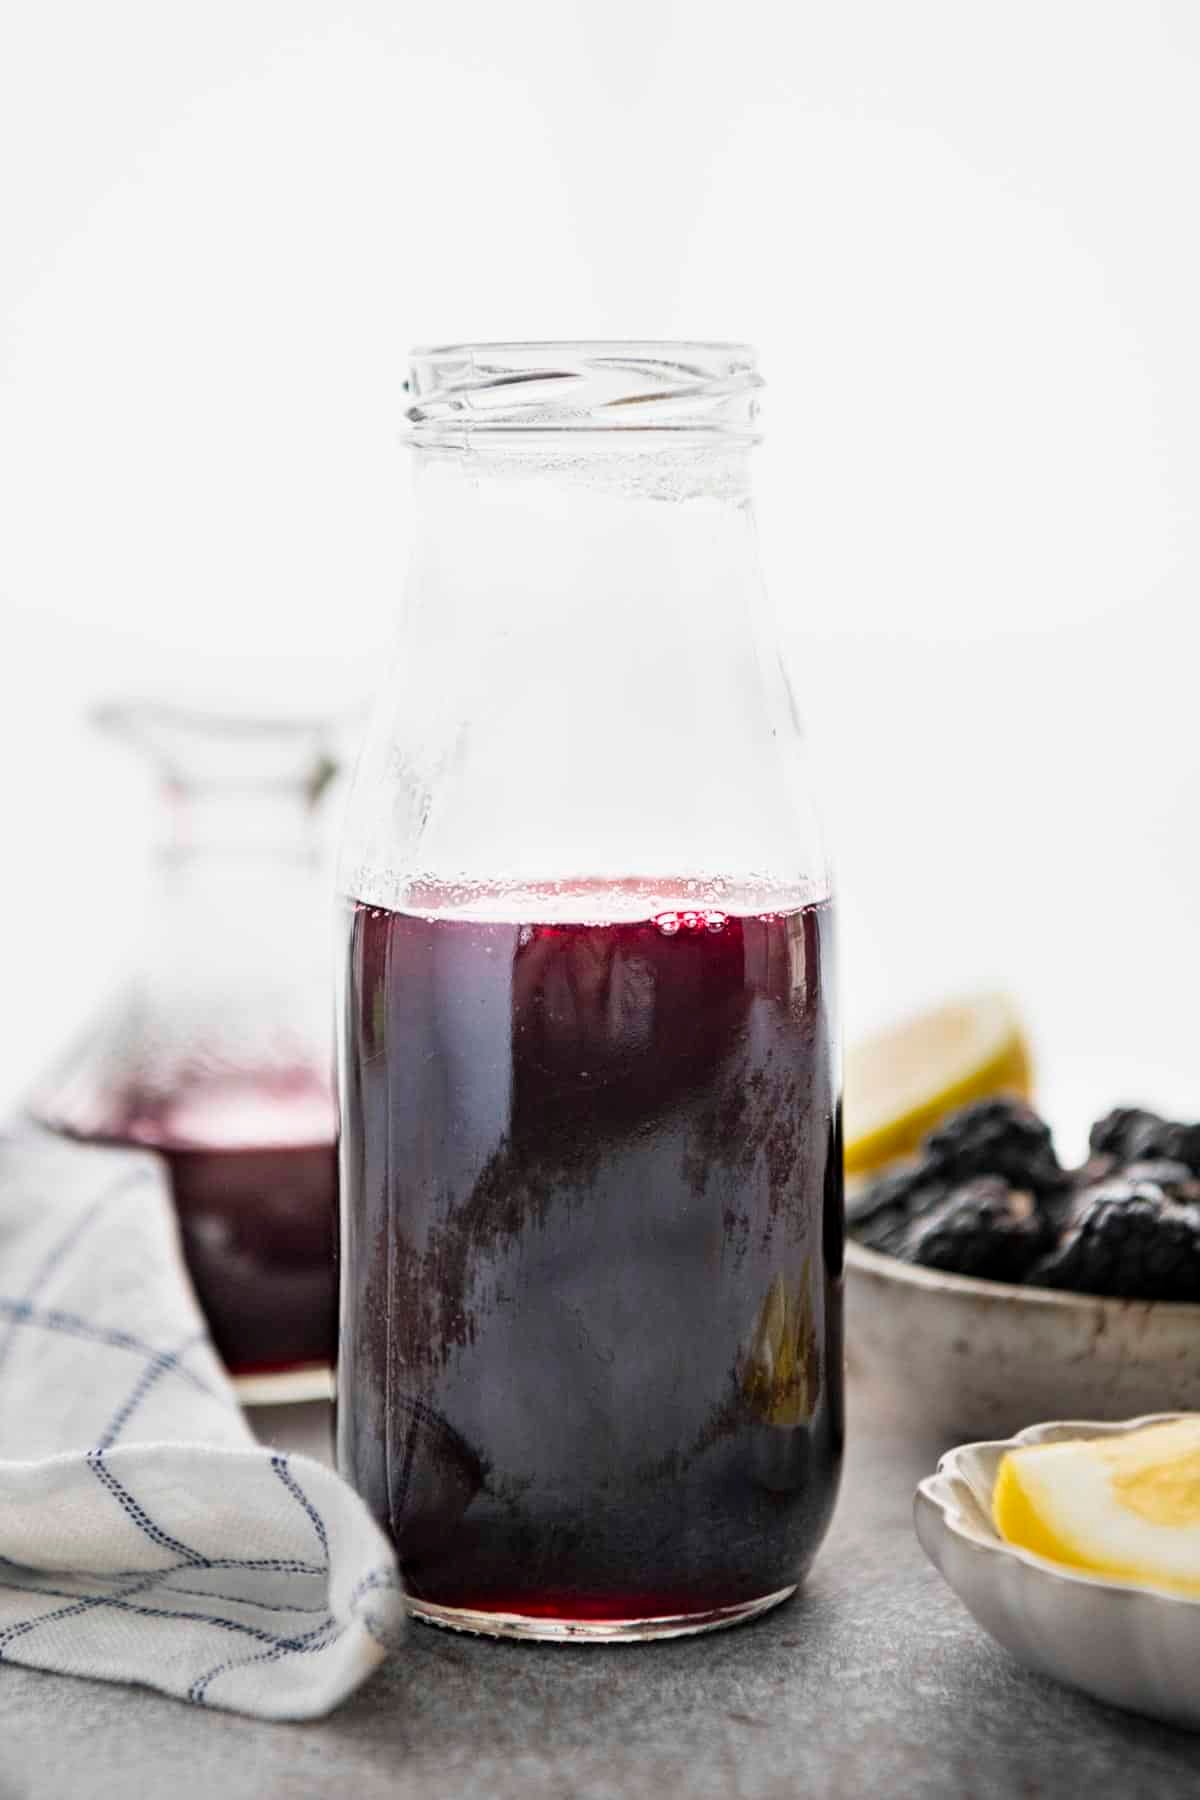 Homemade blackberry syrup recipe stored in a glass bottle.